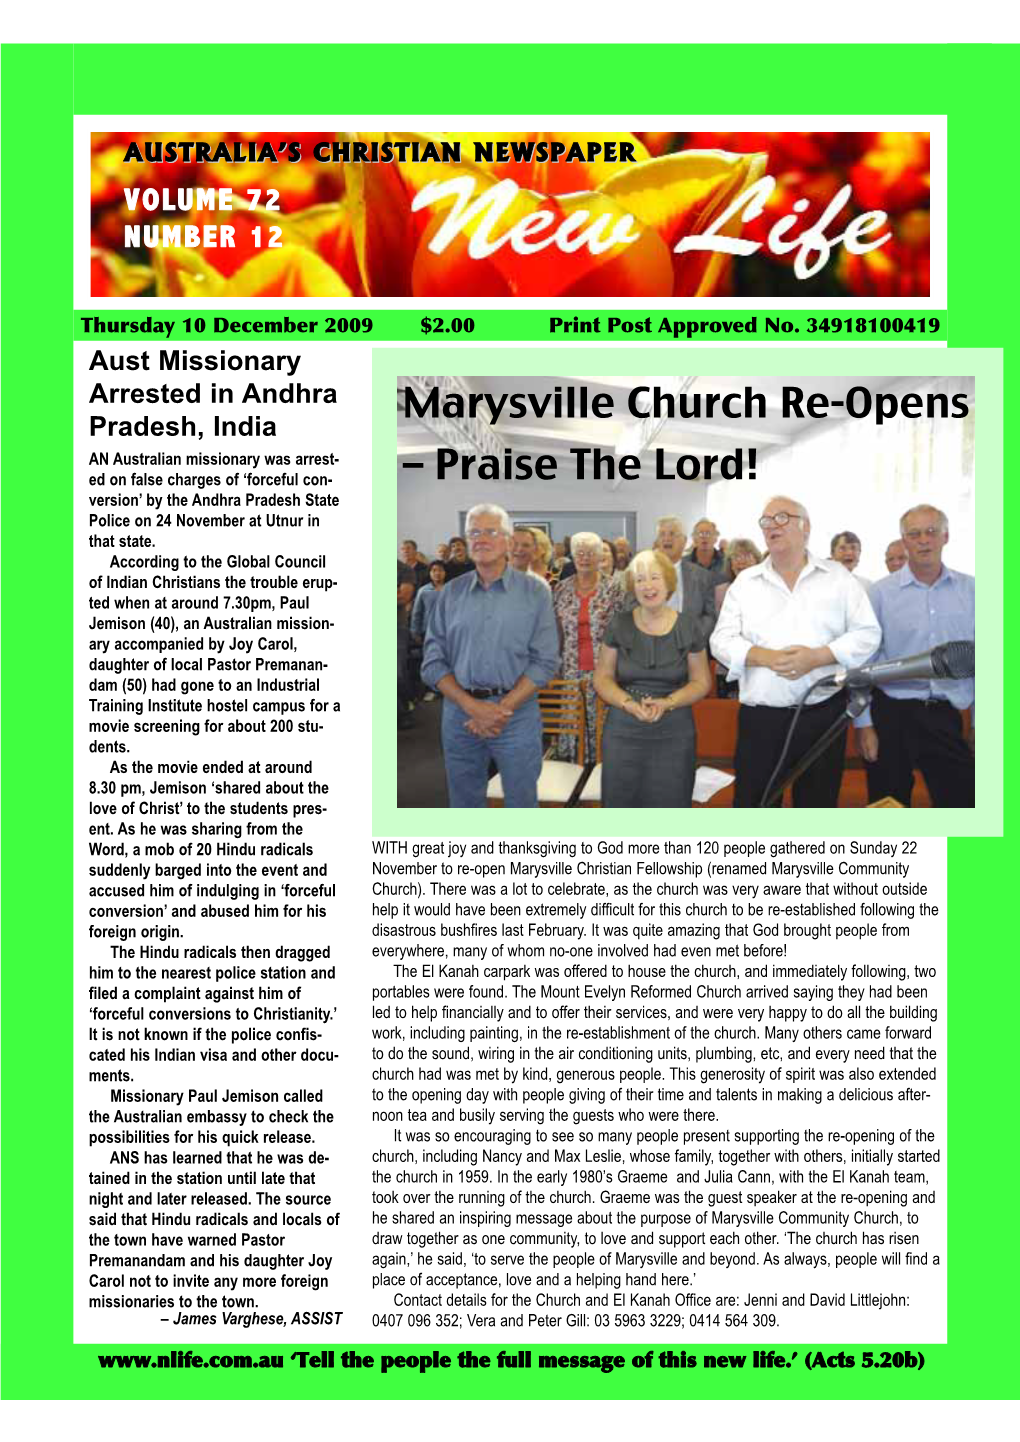 Marysville Church Re-Opens – Praise the Lord!